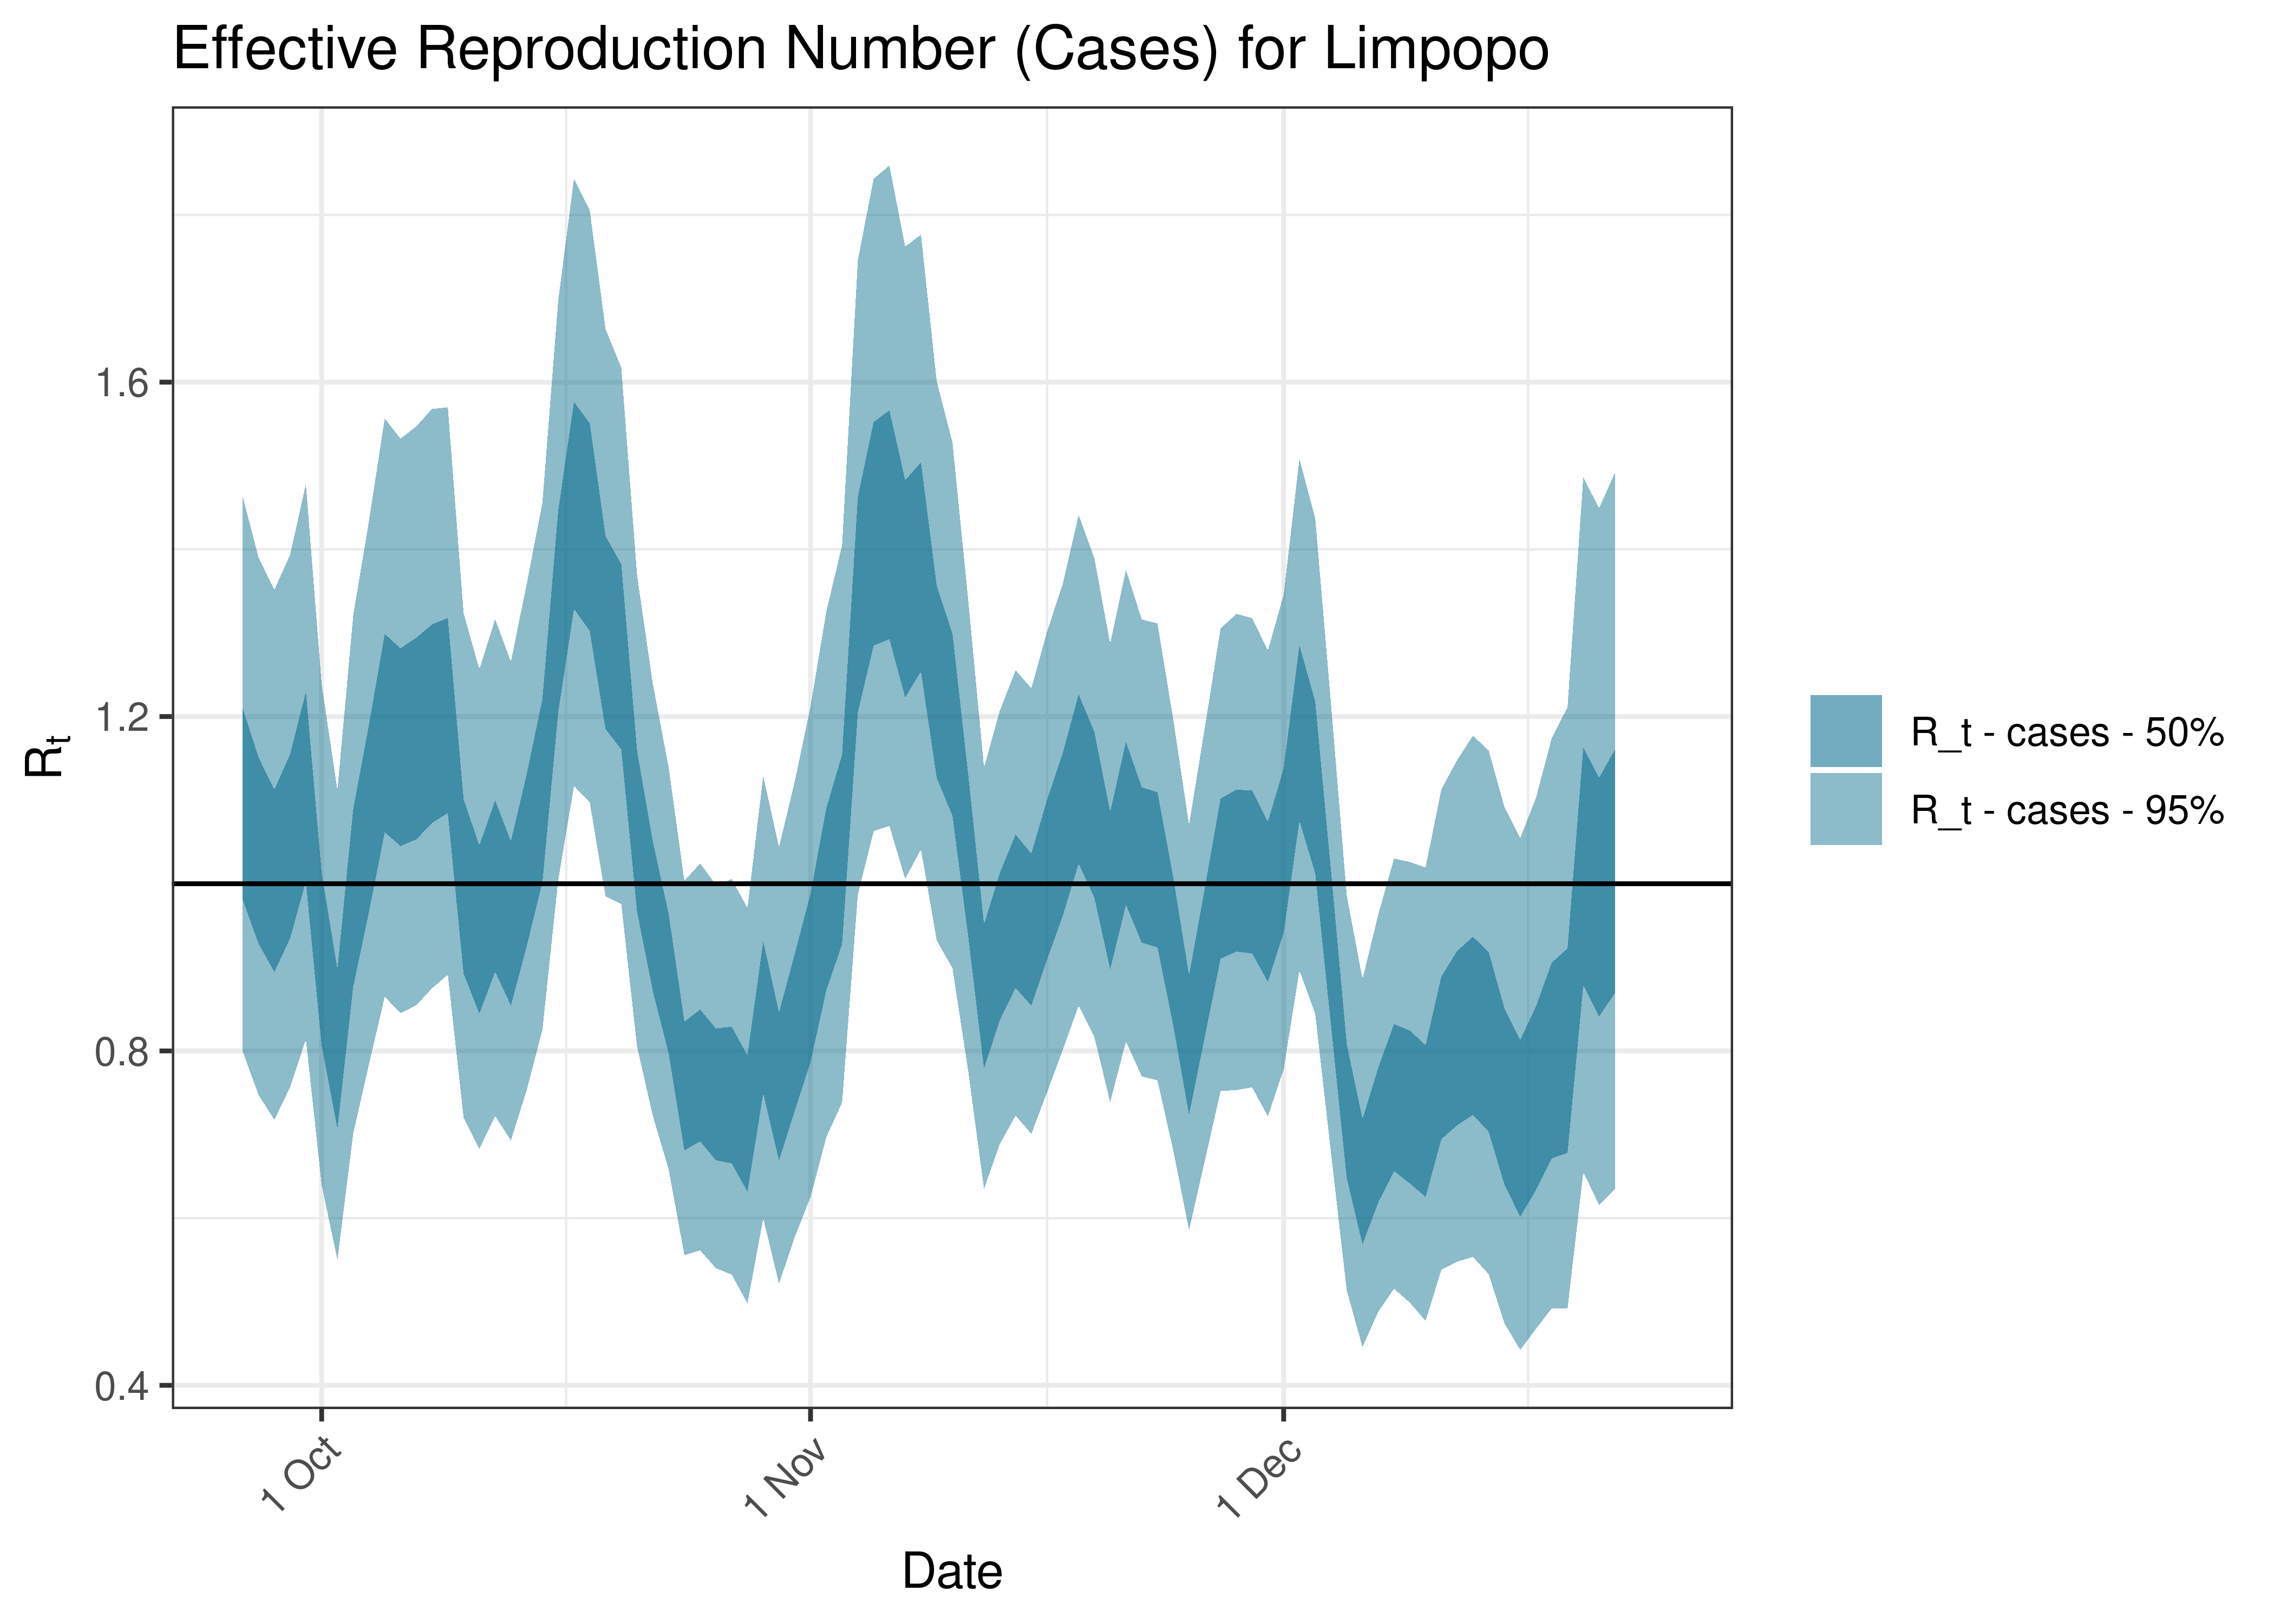 Estimated Effective Reproduction Number Based on Cases for Limpopo over last 90 days